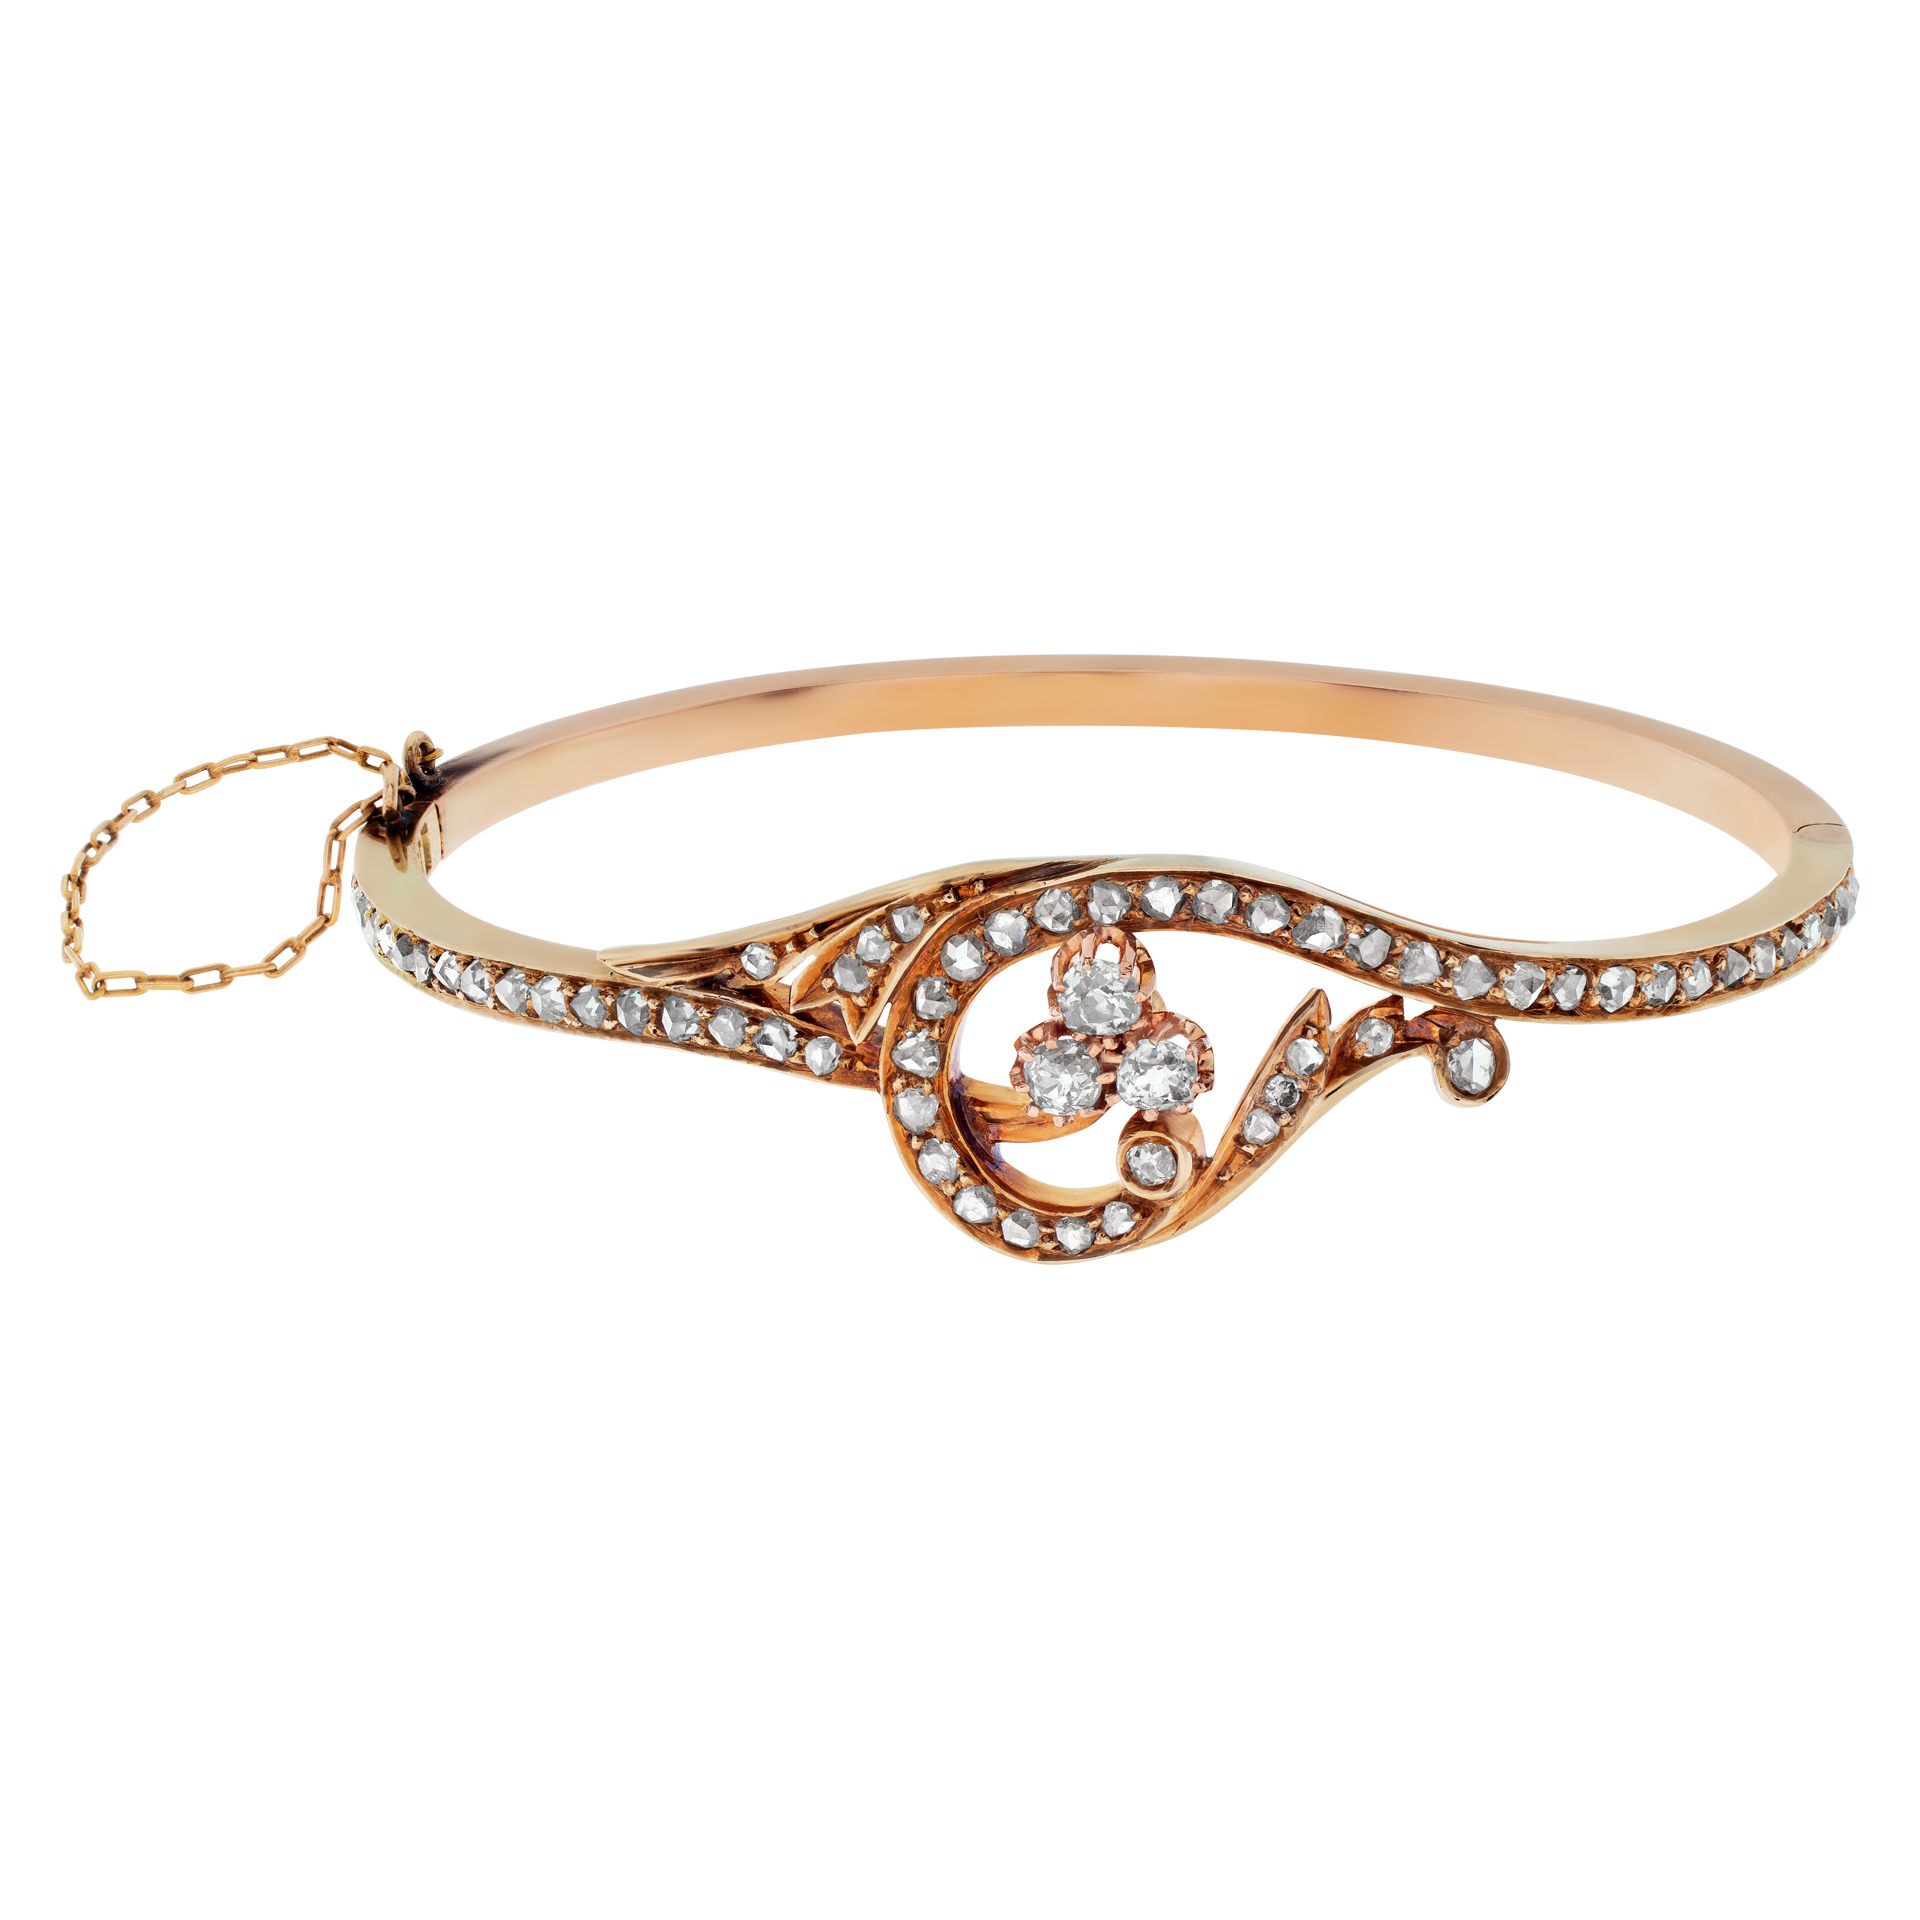 Edwardian bangle with rose cut diamonds set in 14K rose gold. Will fit up to to 7.25 size wrist. st.